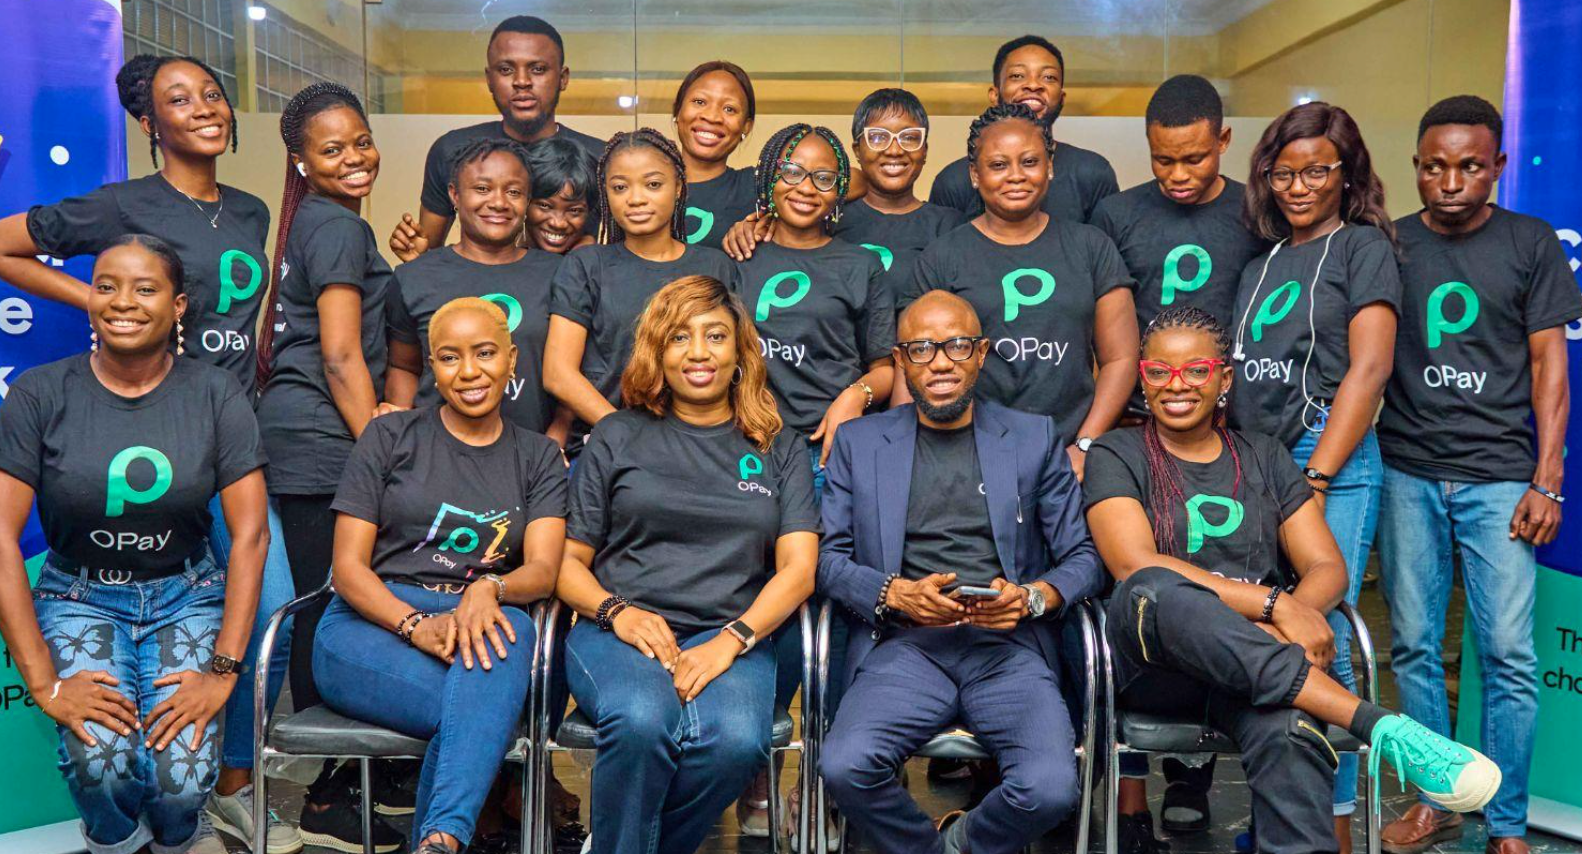 OPay's Valuation Soars Amid Nigeria's Digital Payments Surge